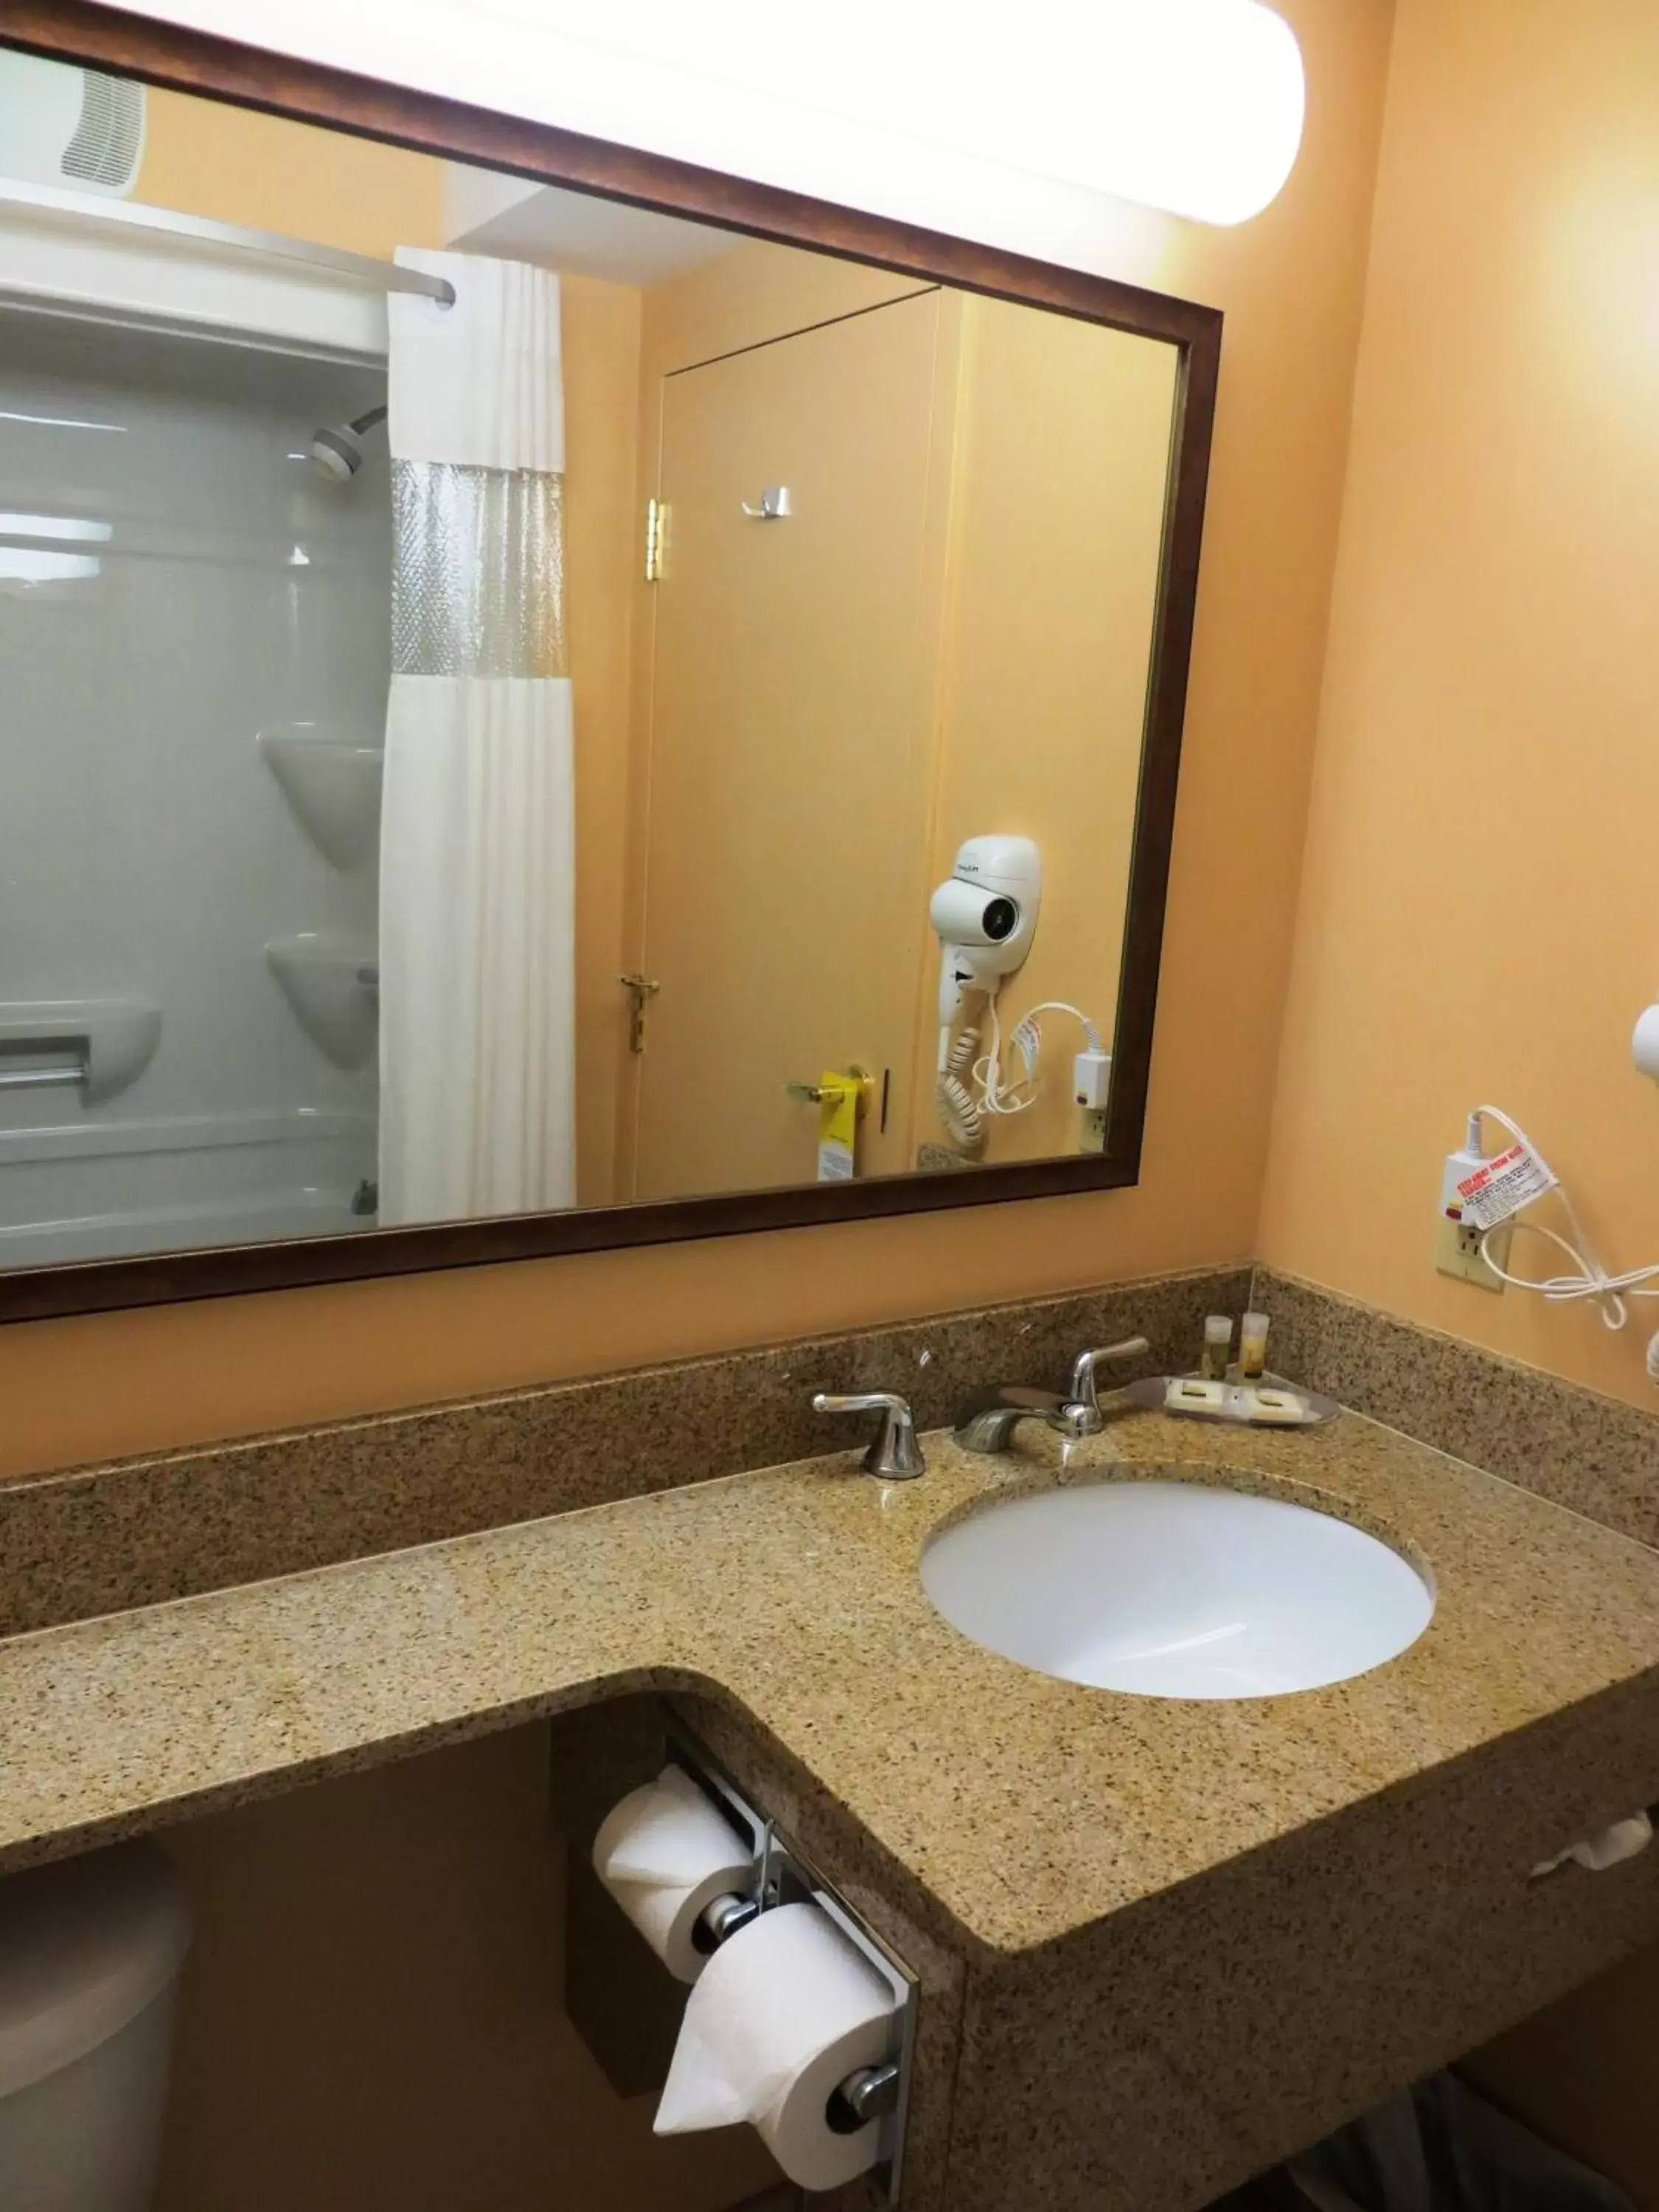 Bathroom in Days Inn by Wyndham Oromocto Conference Centre